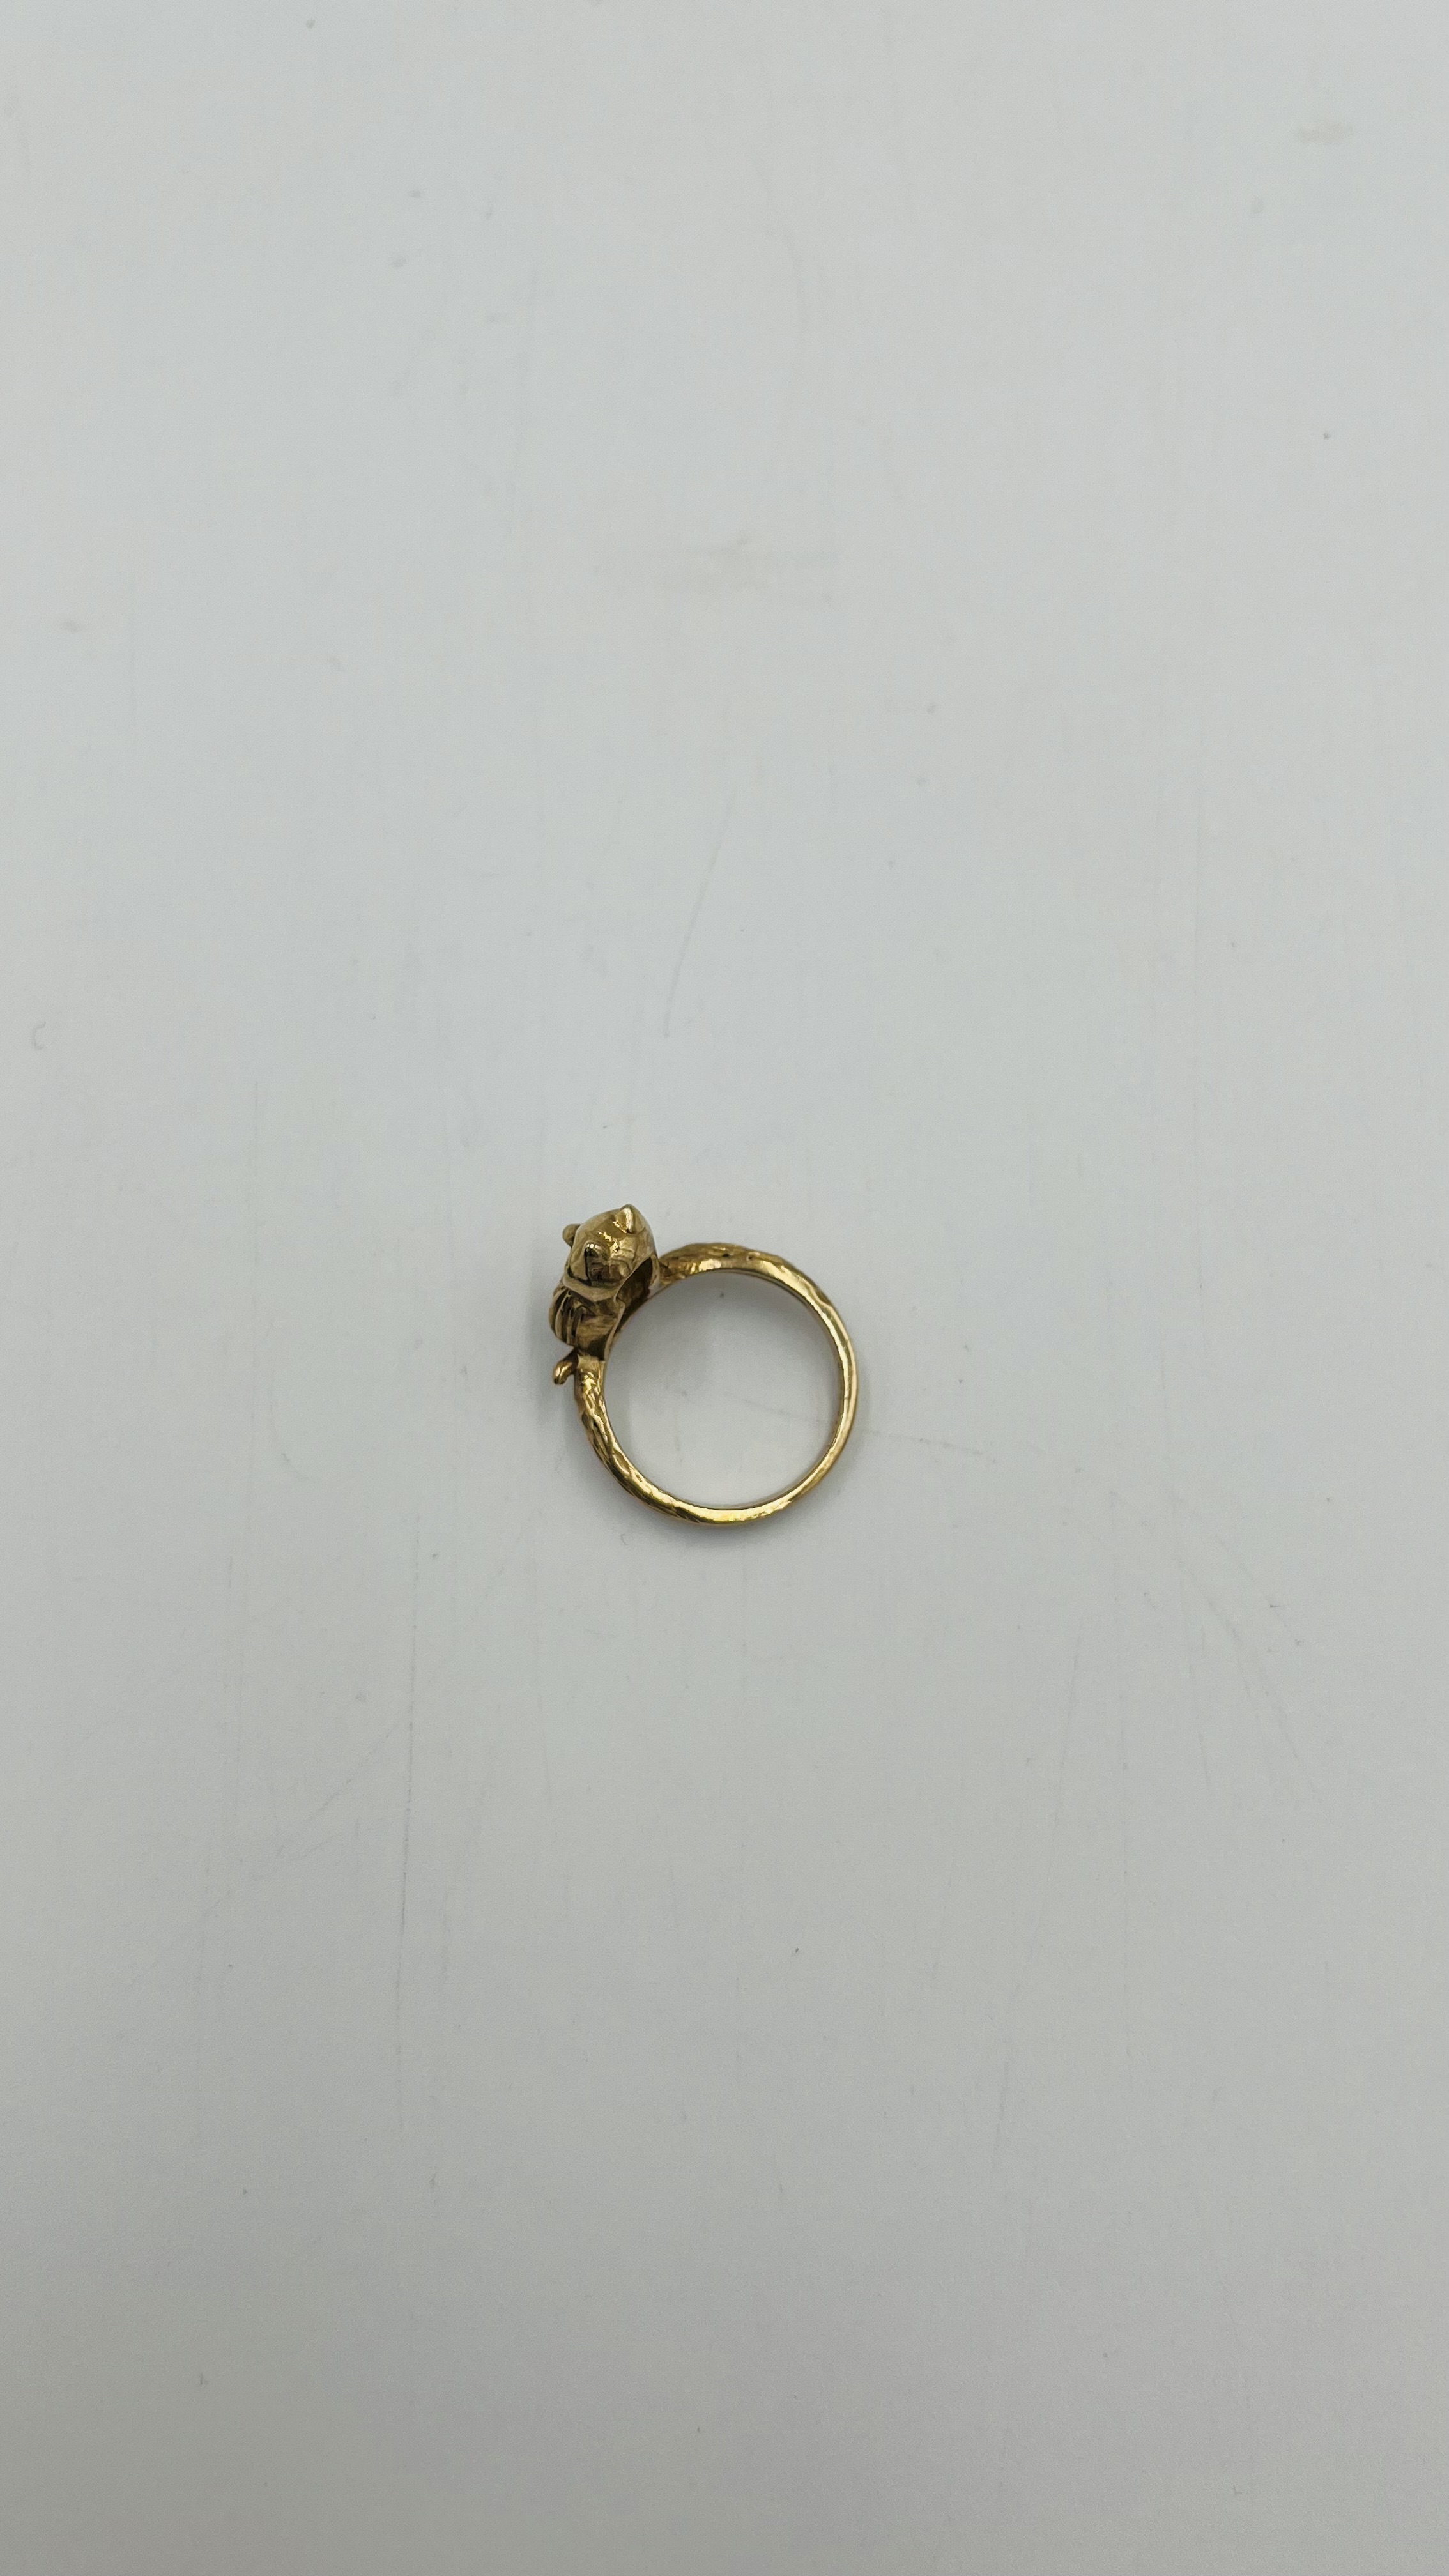 9ct gold ring in the style of an owl - Image 4 of 8